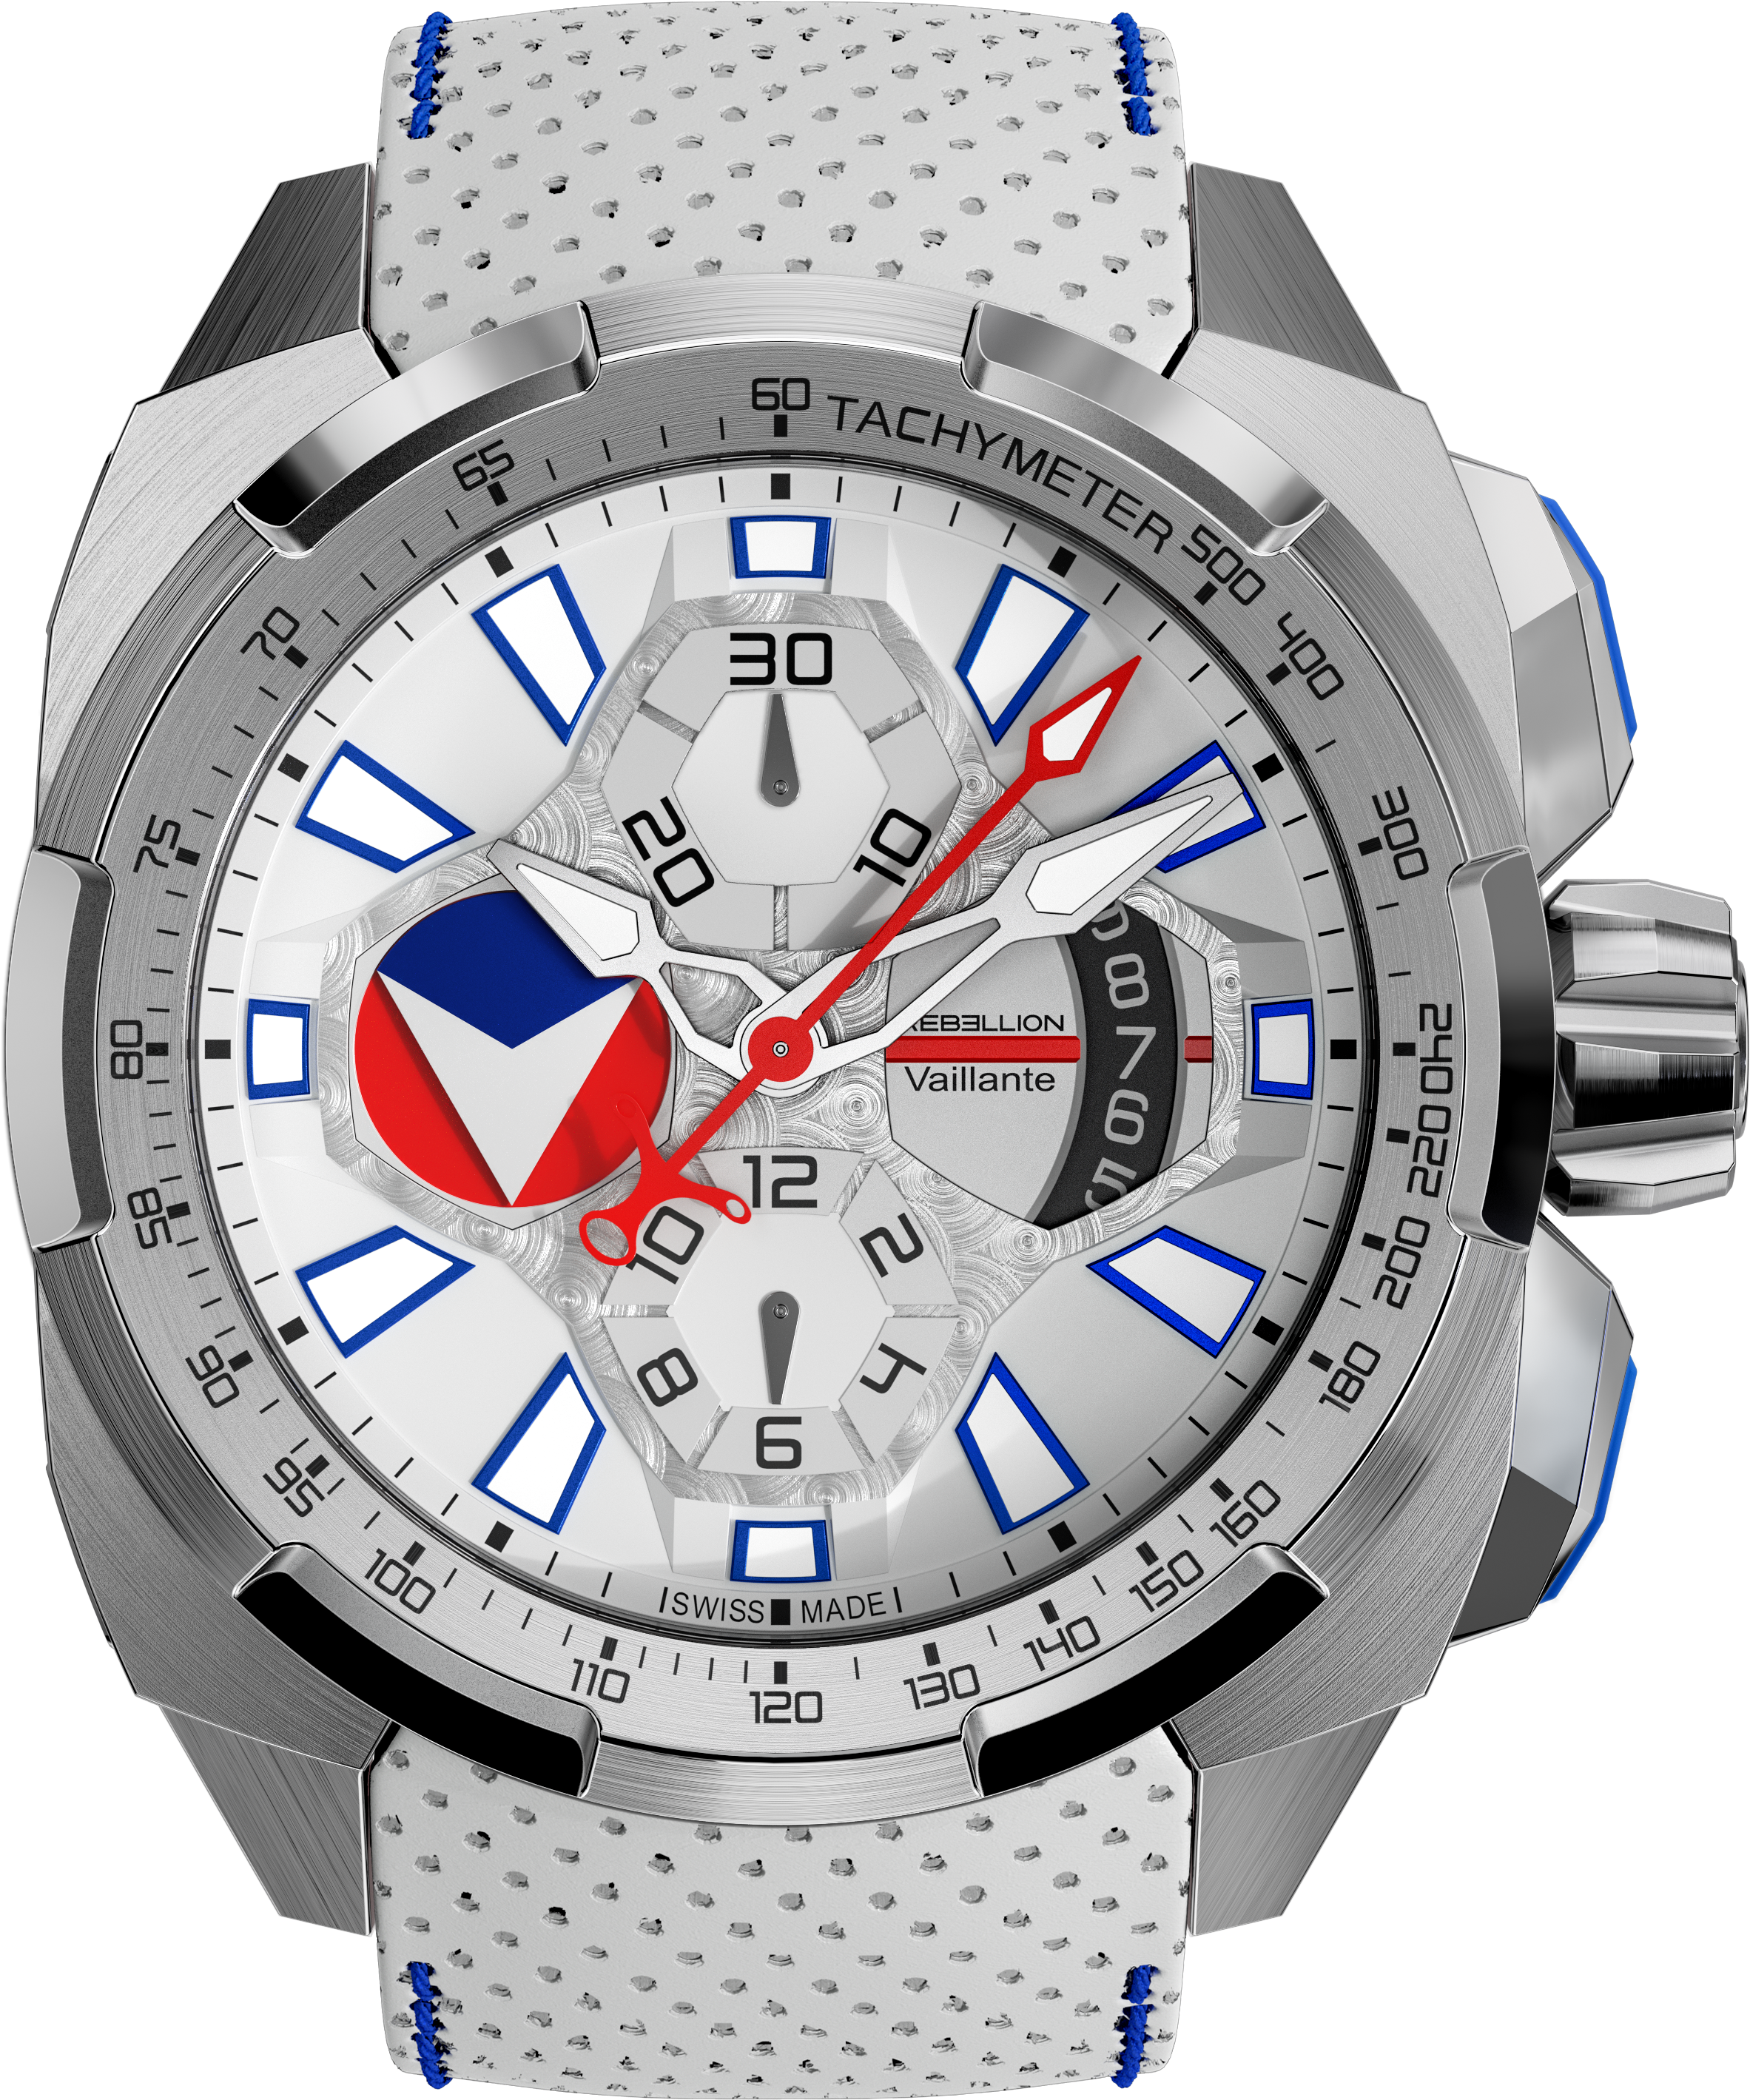 A Silver Watch With Red And Blue Accents